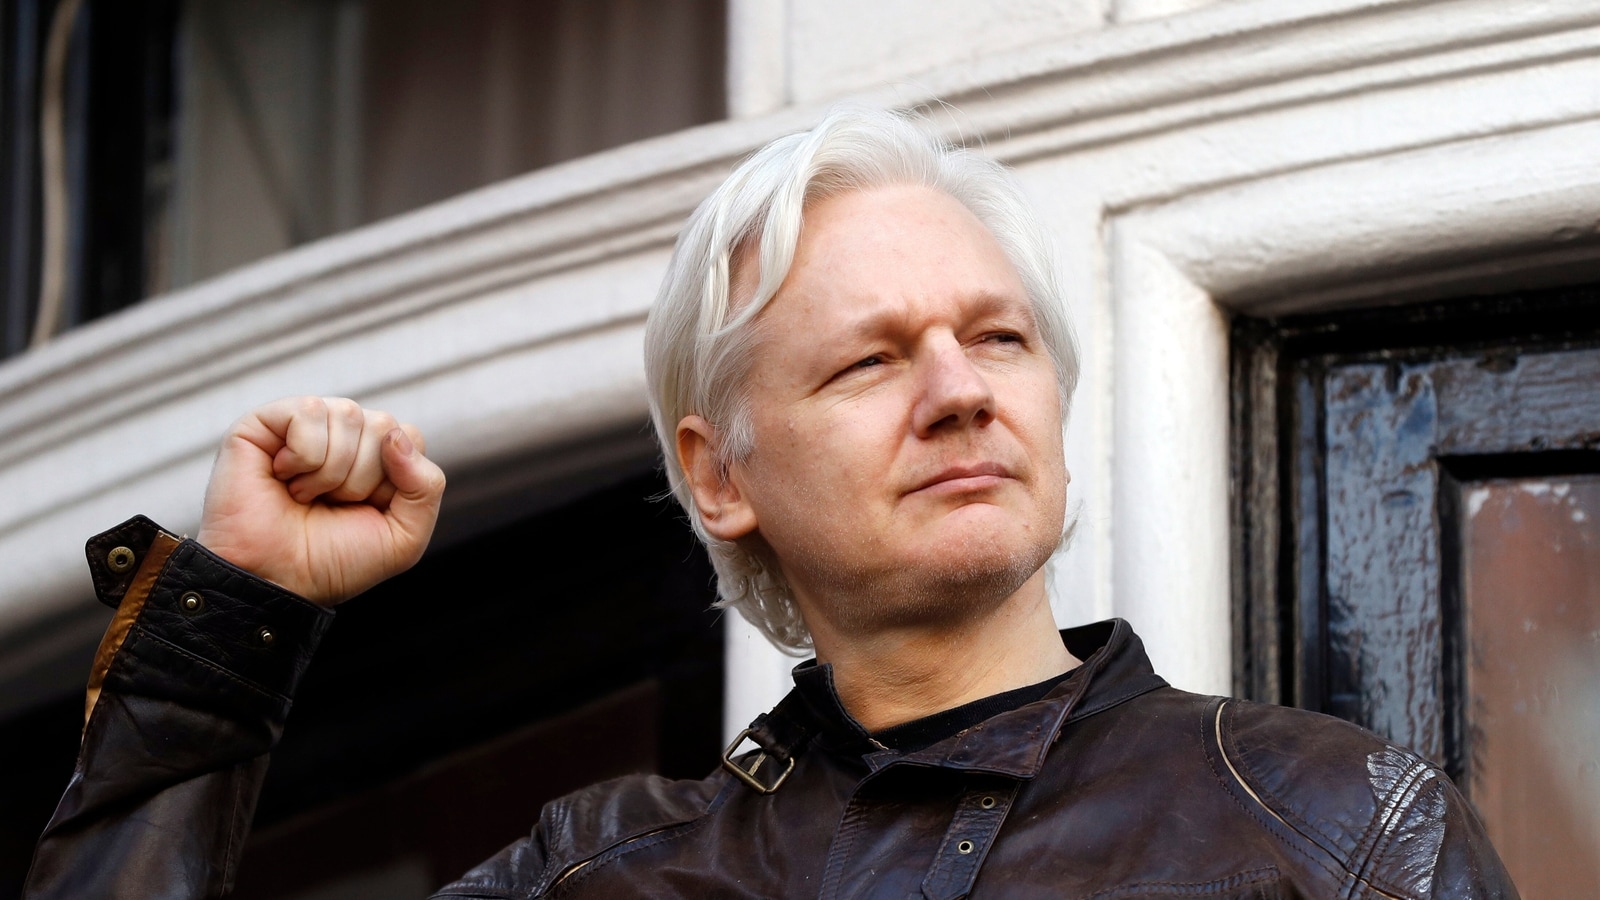 WikiLeaks founder Julian Assange may appeal against extradition to the United States, UK court World News